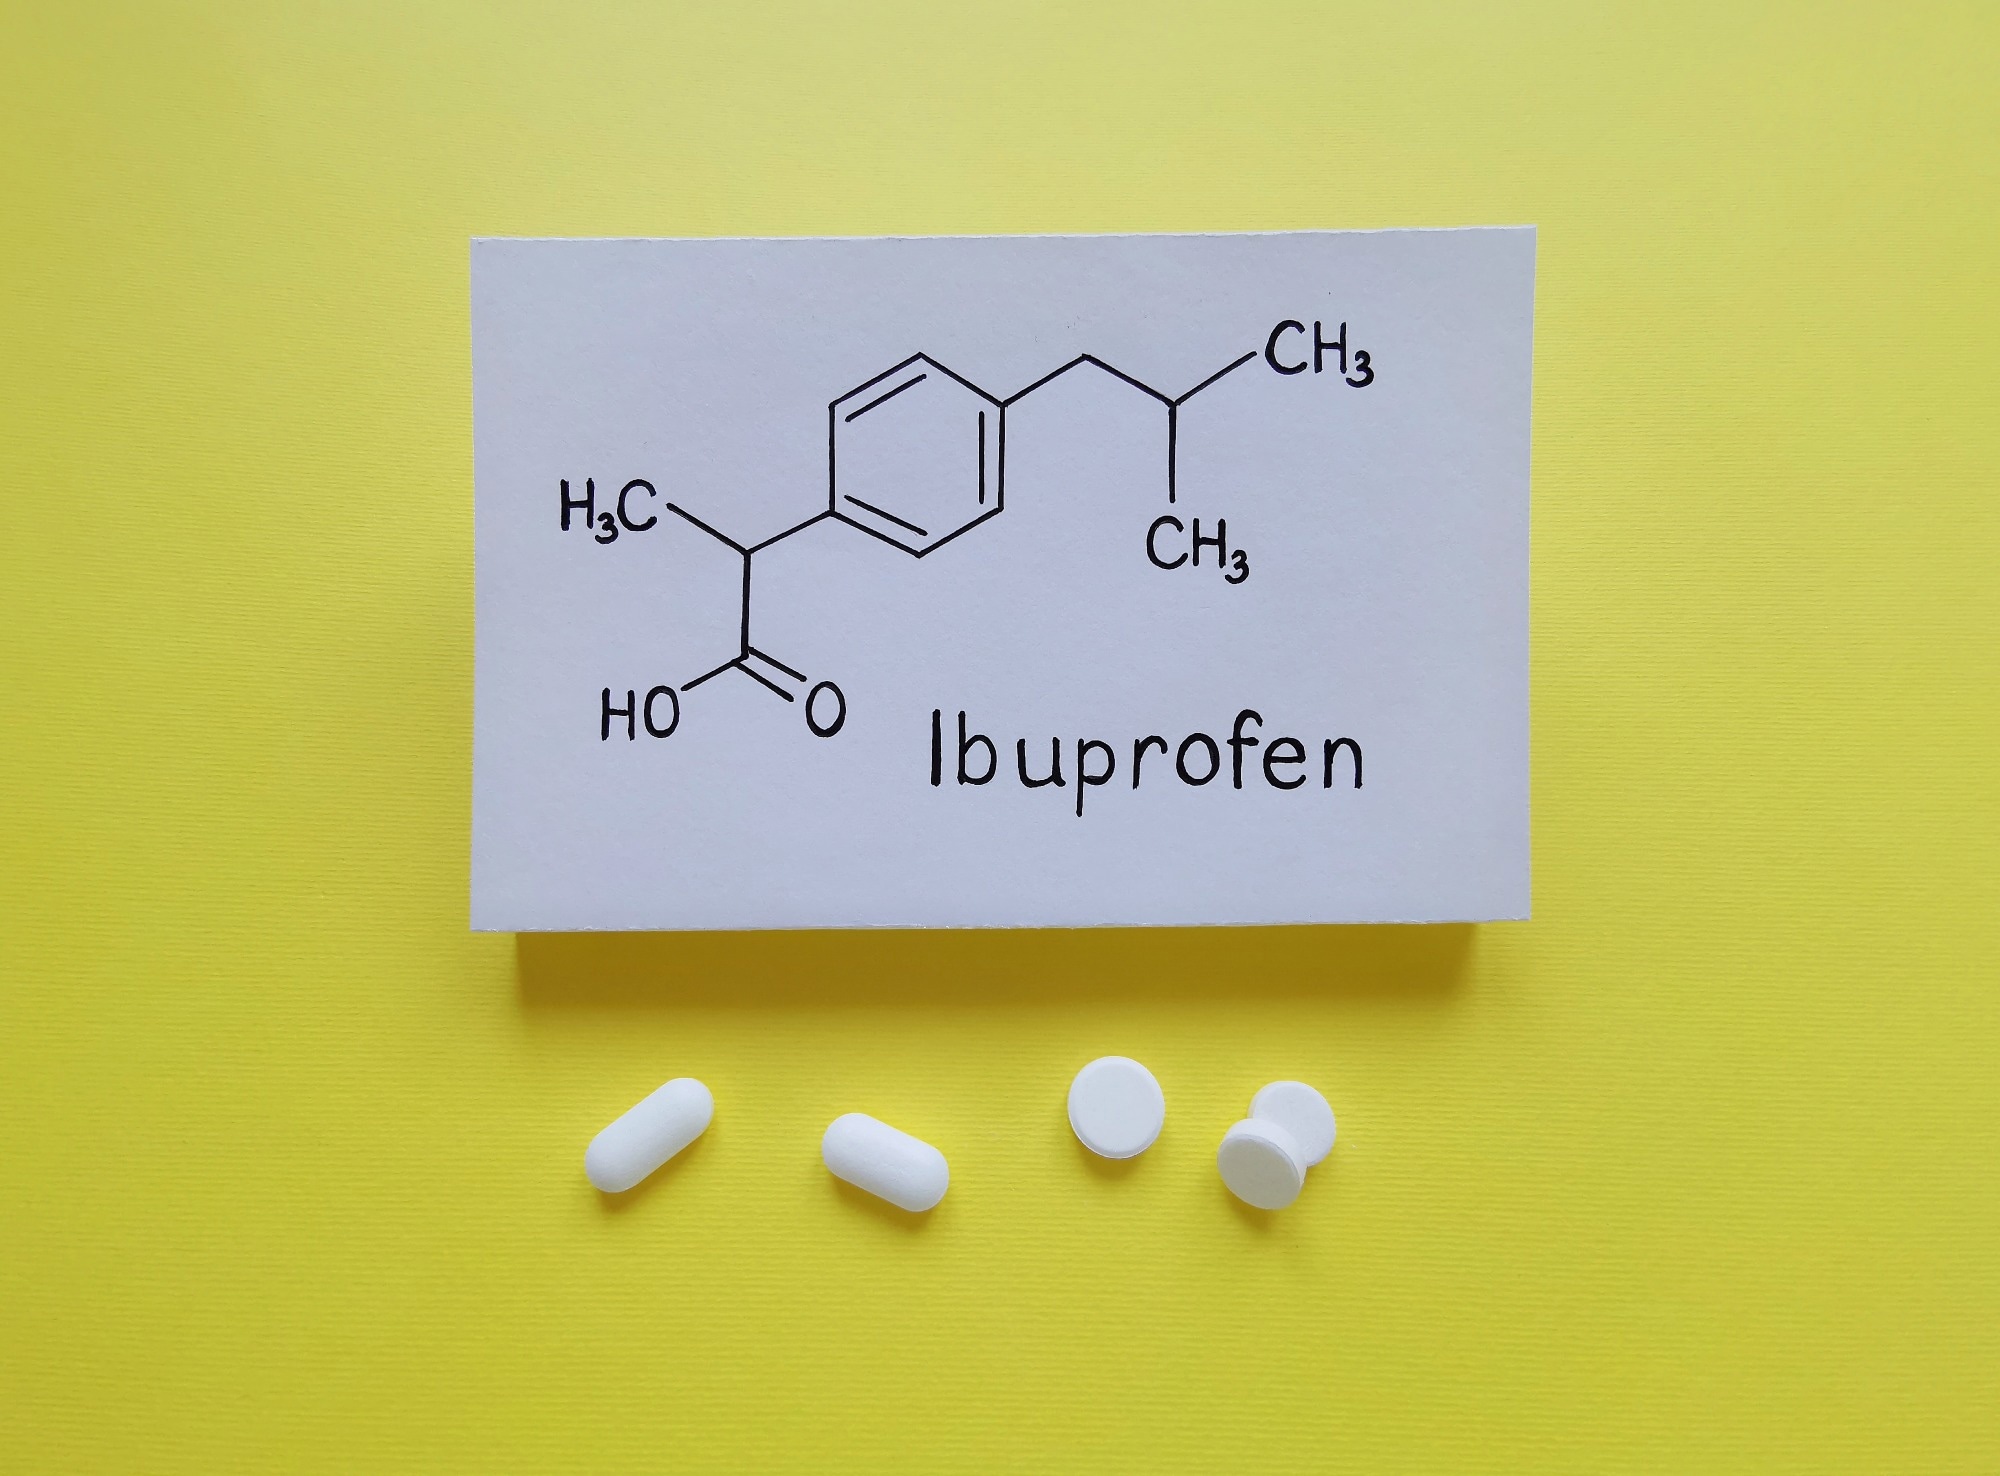 Ibuprofen is a medication in the nonsteroidal anti-inflammatory drug (NSAID) class that is used for treating pain and fever. Image Credit: Danijela Maksimovic / Shutterstock